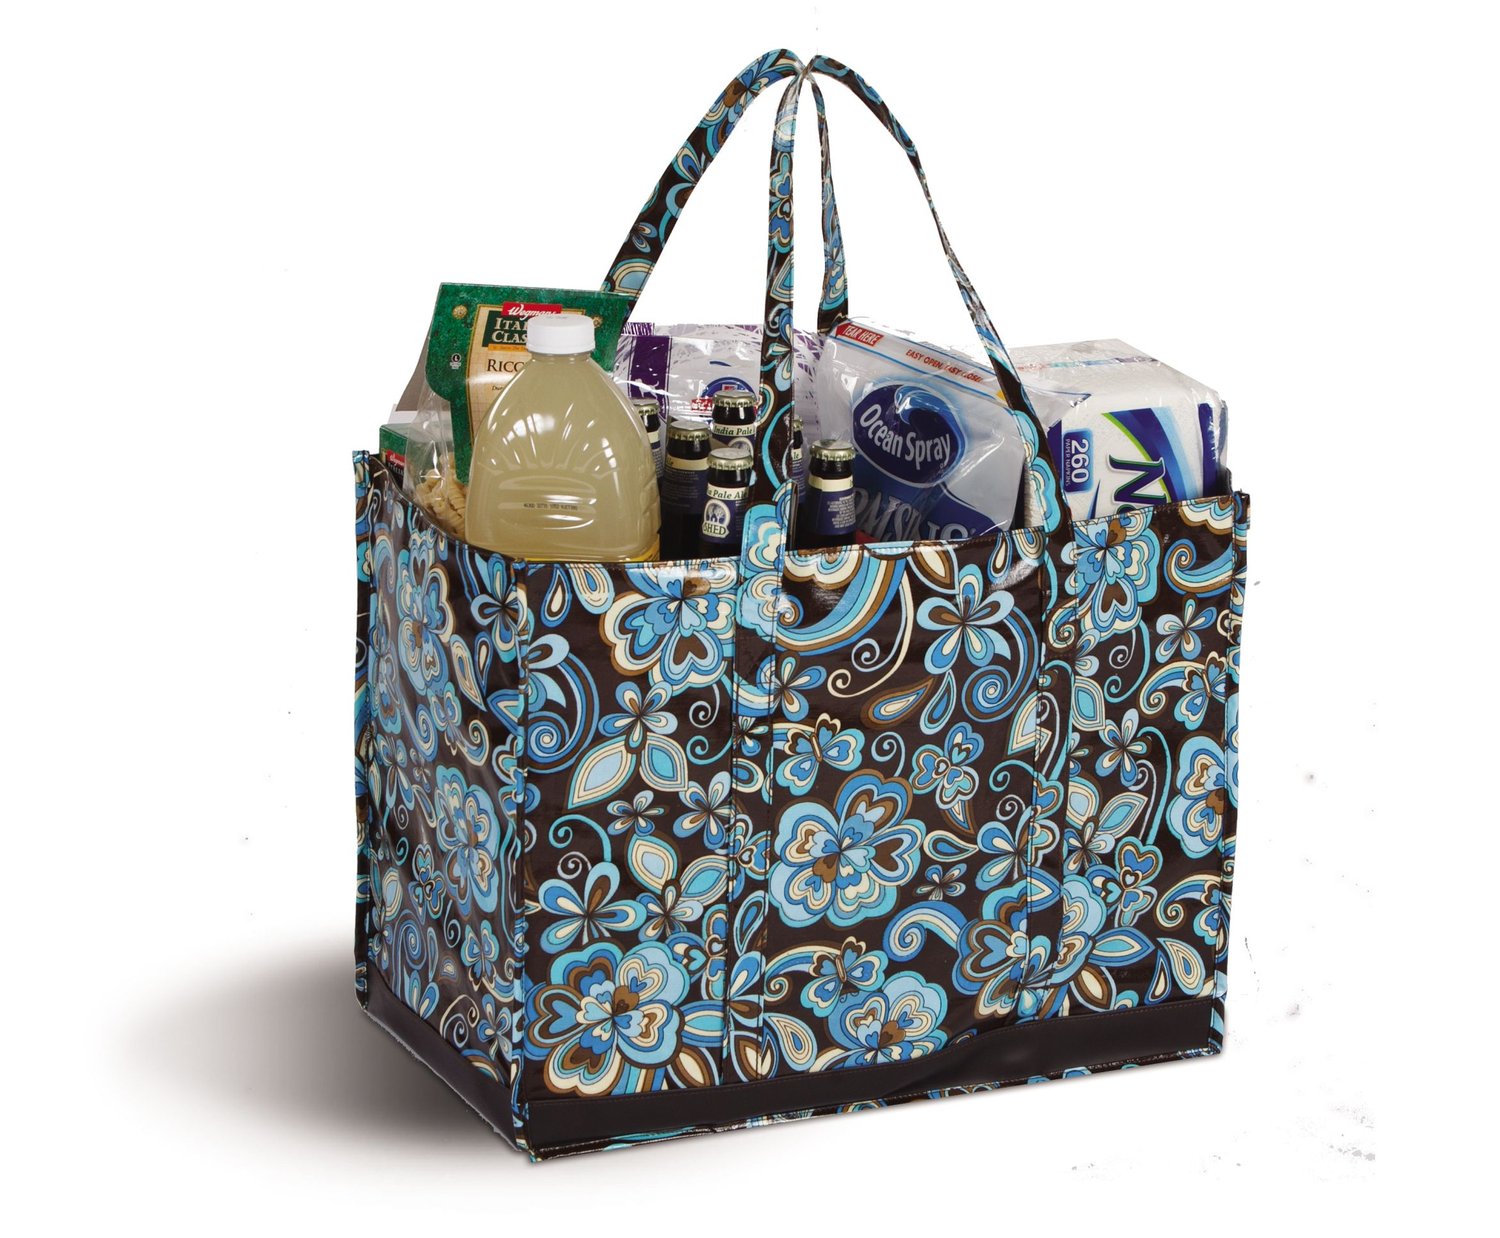 thirty-one deluxe zip-top organizing utility tote